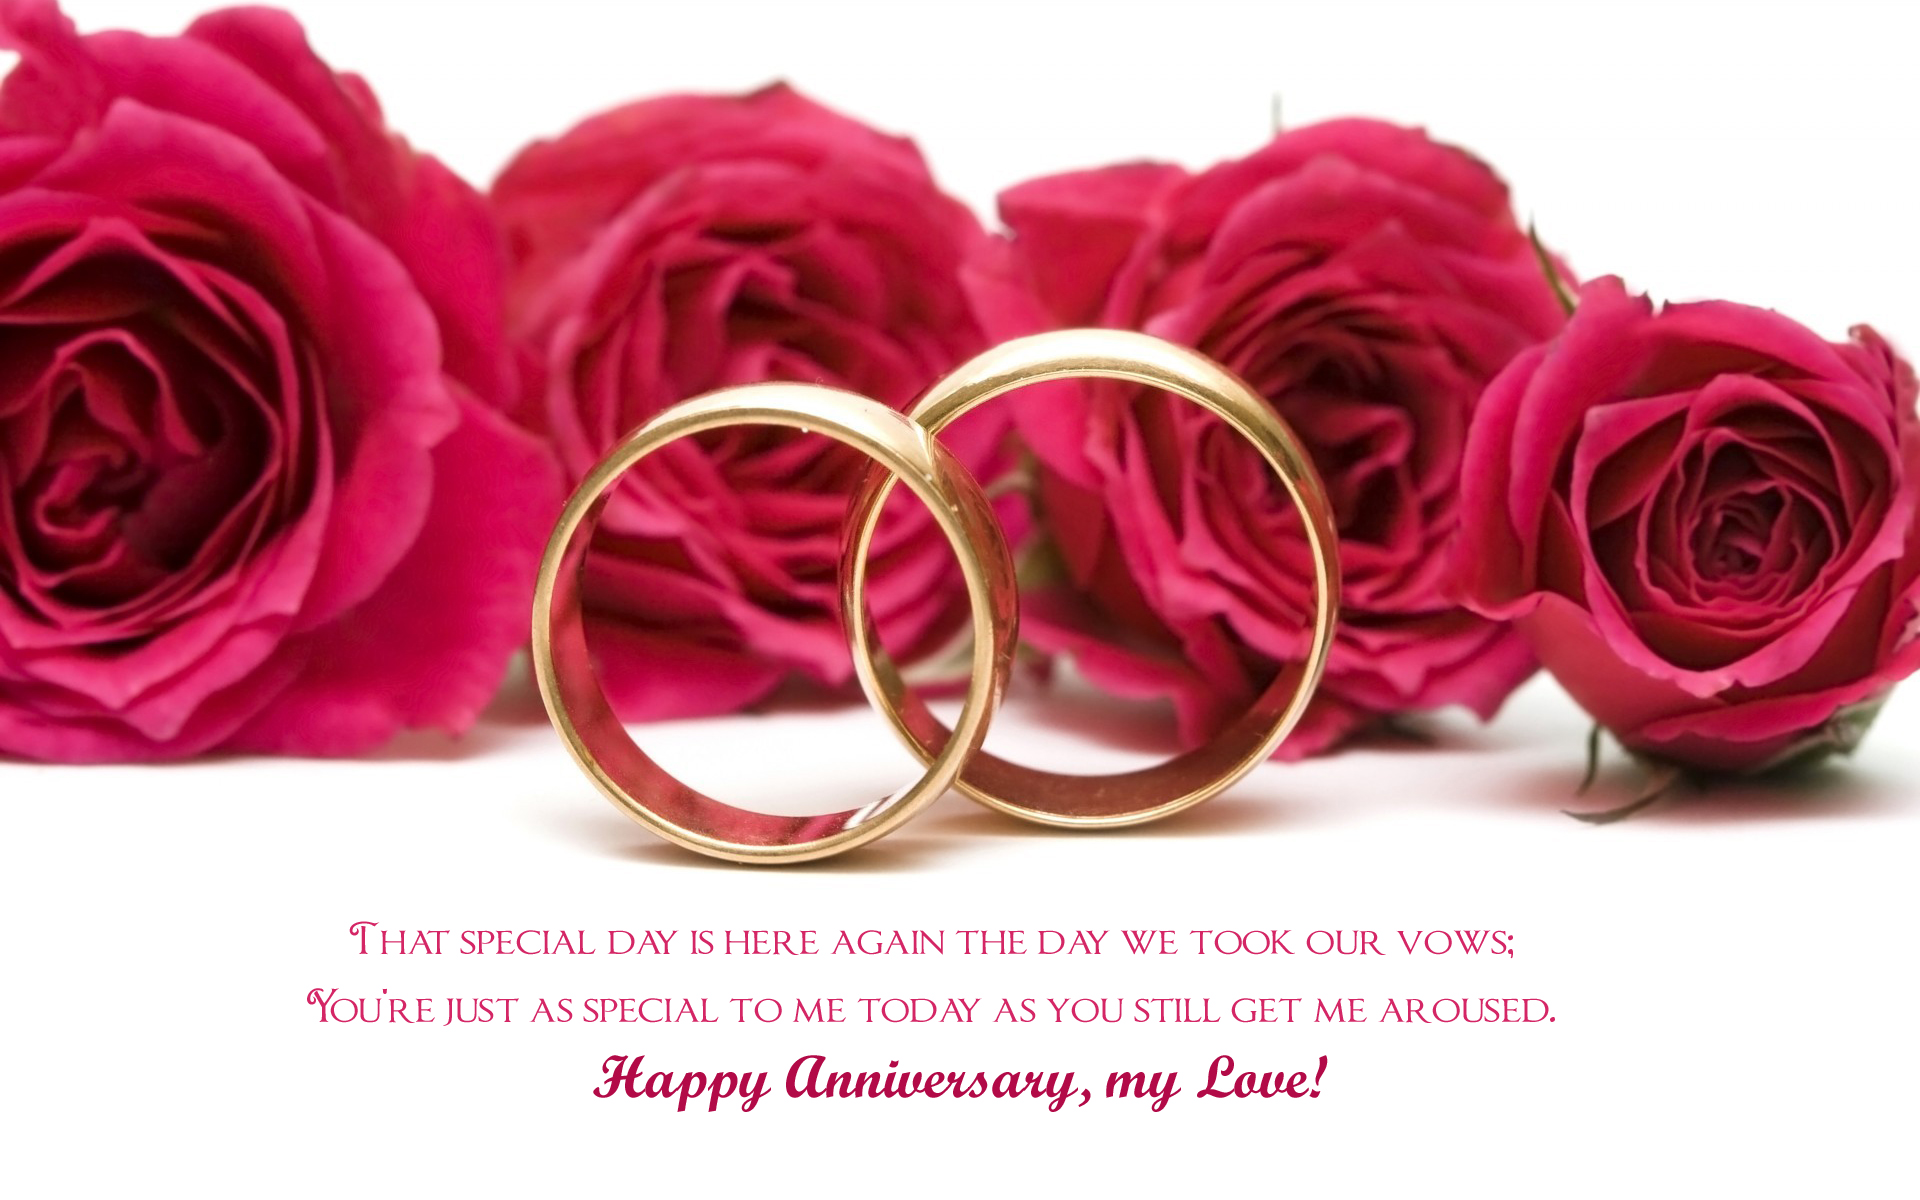 happy anniversary wallpaper,pink,garden roses,rose,text,red